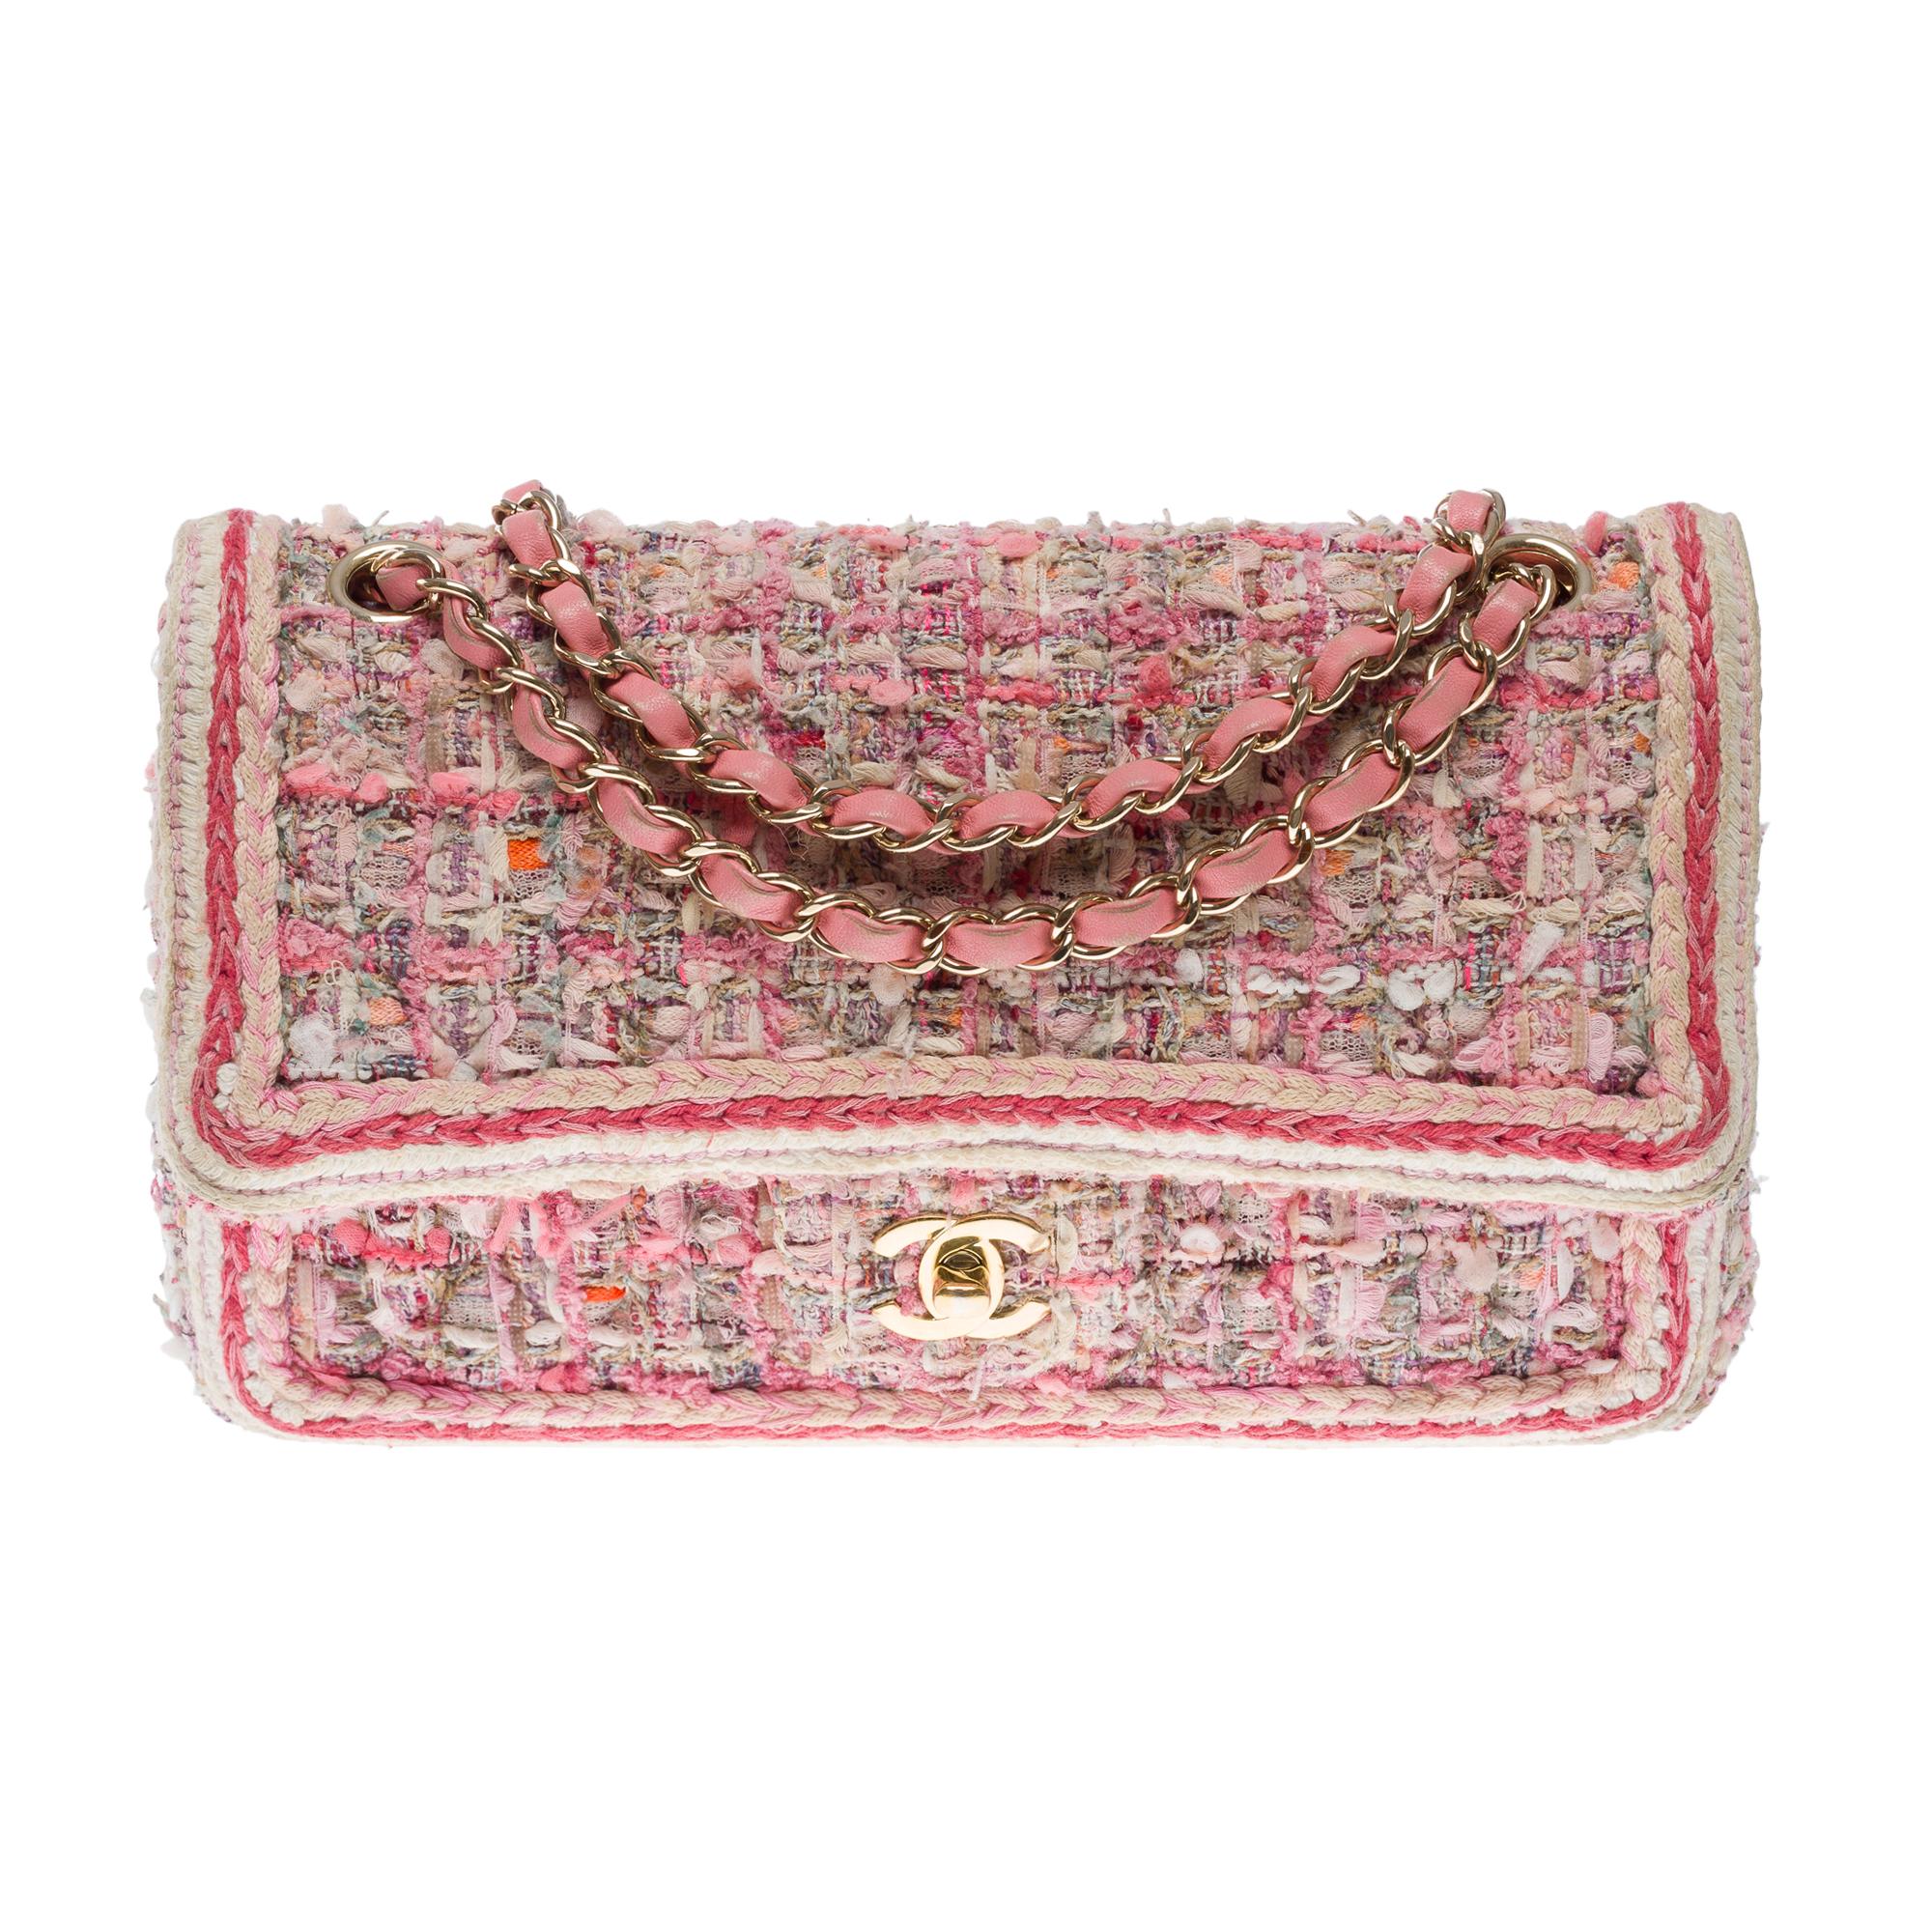 Exceptional​ ​and​ ​Rare​ ​Timeless/Classic​ ​double​ ​flap​ ​shoulder​ ​bag​ ​in​ ​pink​ ​quilted​ ​Tweed,​ ​champagne​ ​metal​ ​hardware,​ ​champagne​ ​metal​ ​handle​ ​interlaced​ ​with​ ​pink​ ​leather​ ​for​ ​a​ ​hand​ ​or​ ​shoulder​ ​or​